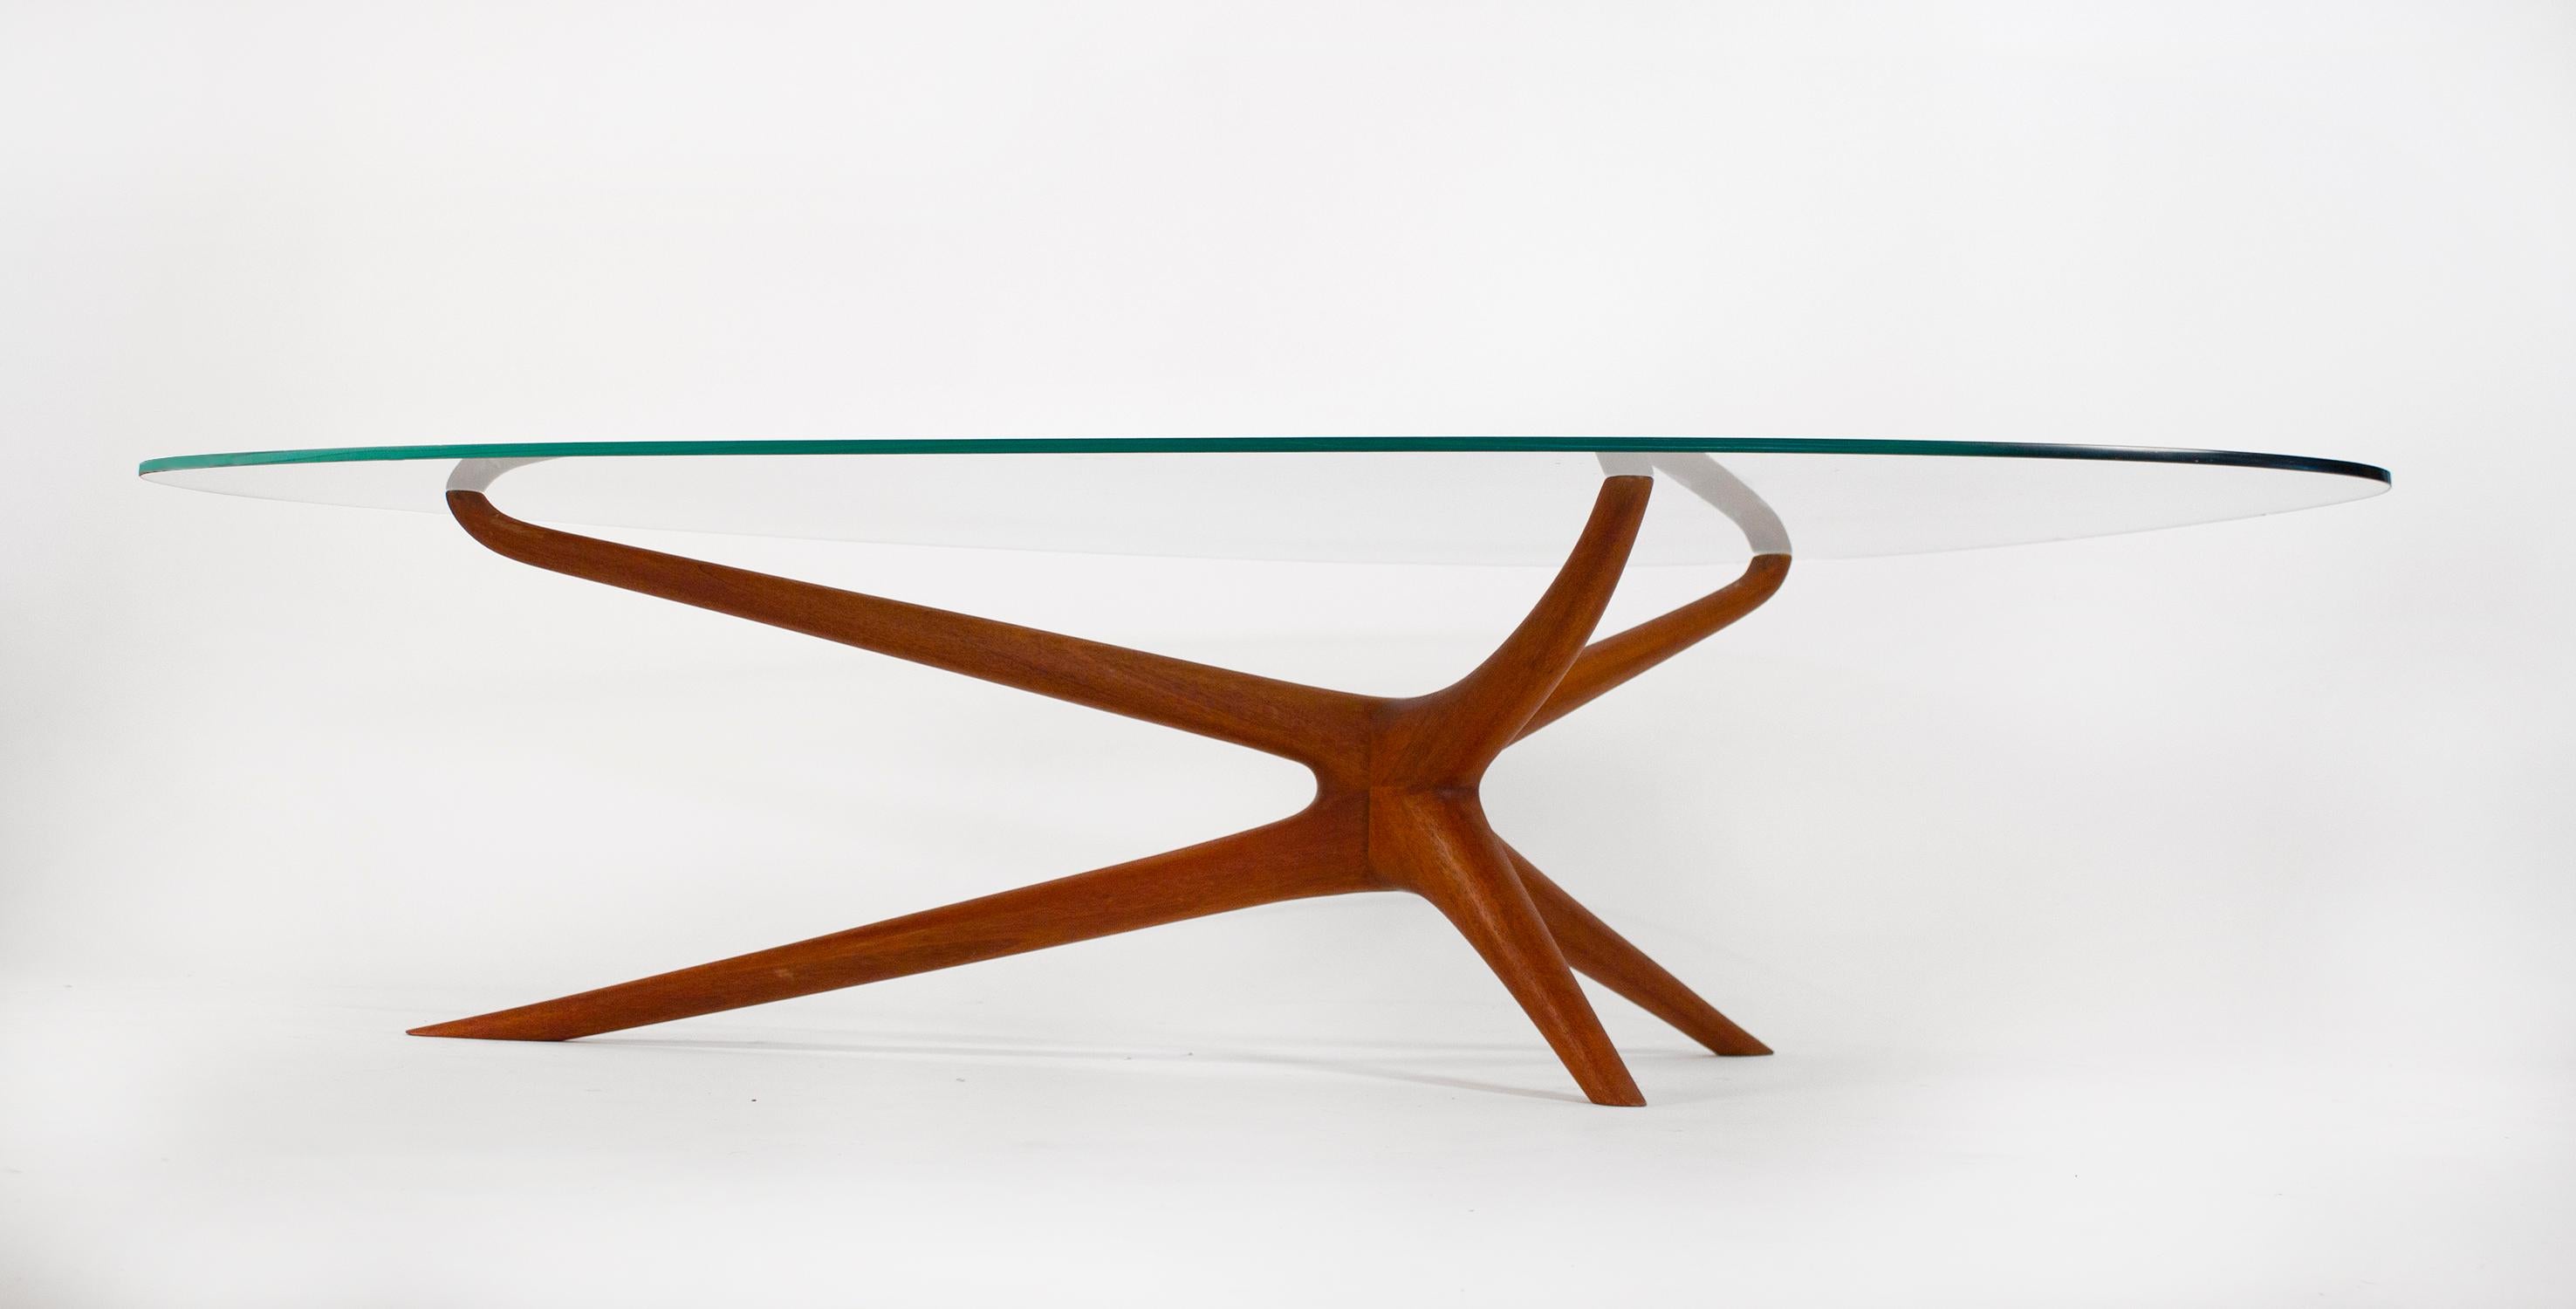 North American Mid-Century Modern Tri-Symmetric Organic Coffee Table in Mahogany with Glass Top For Sale